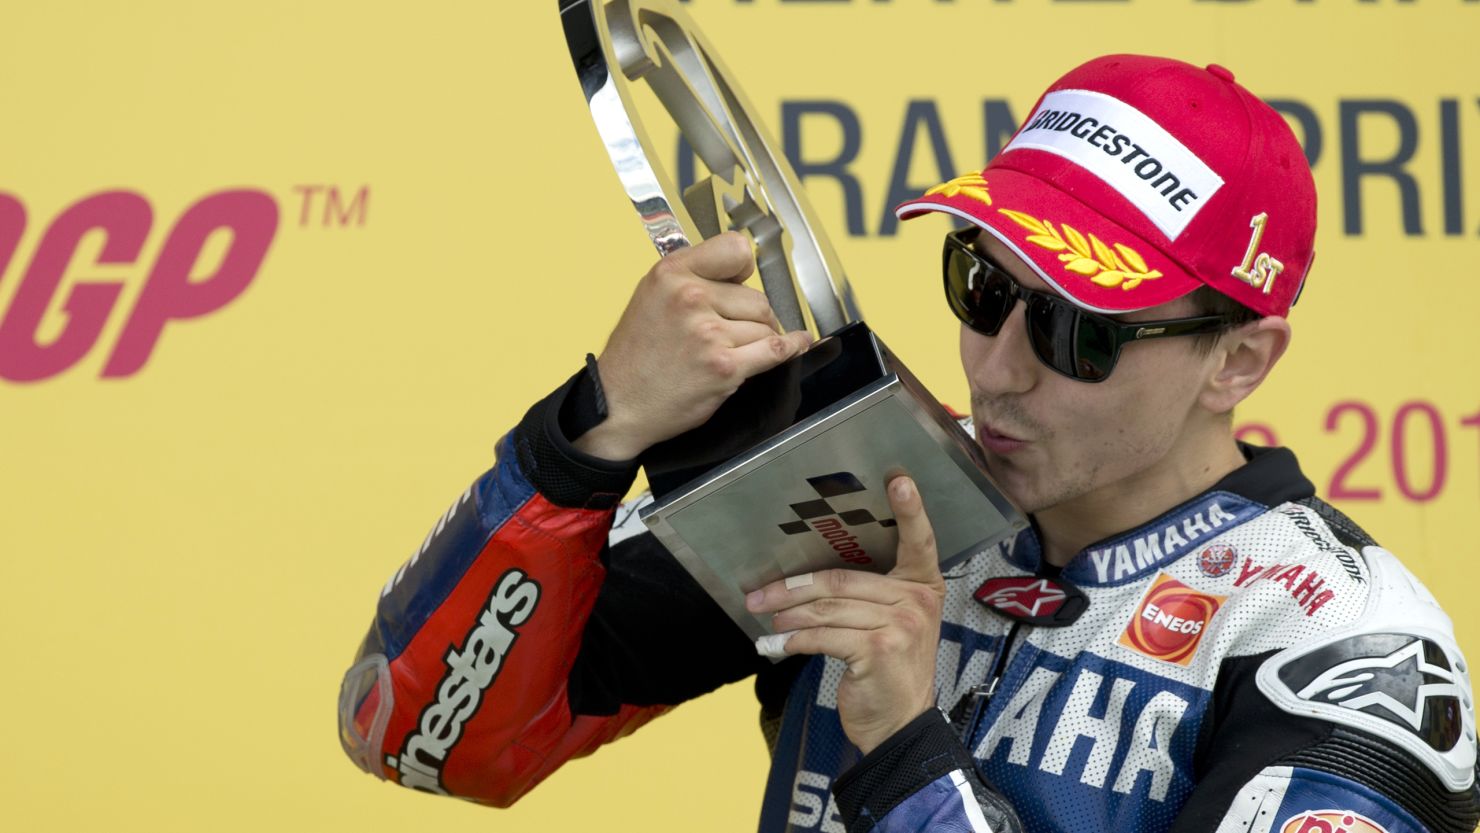 Jorge Lorenzo gets up close and personal with the trophy after winning the British MotoGP..